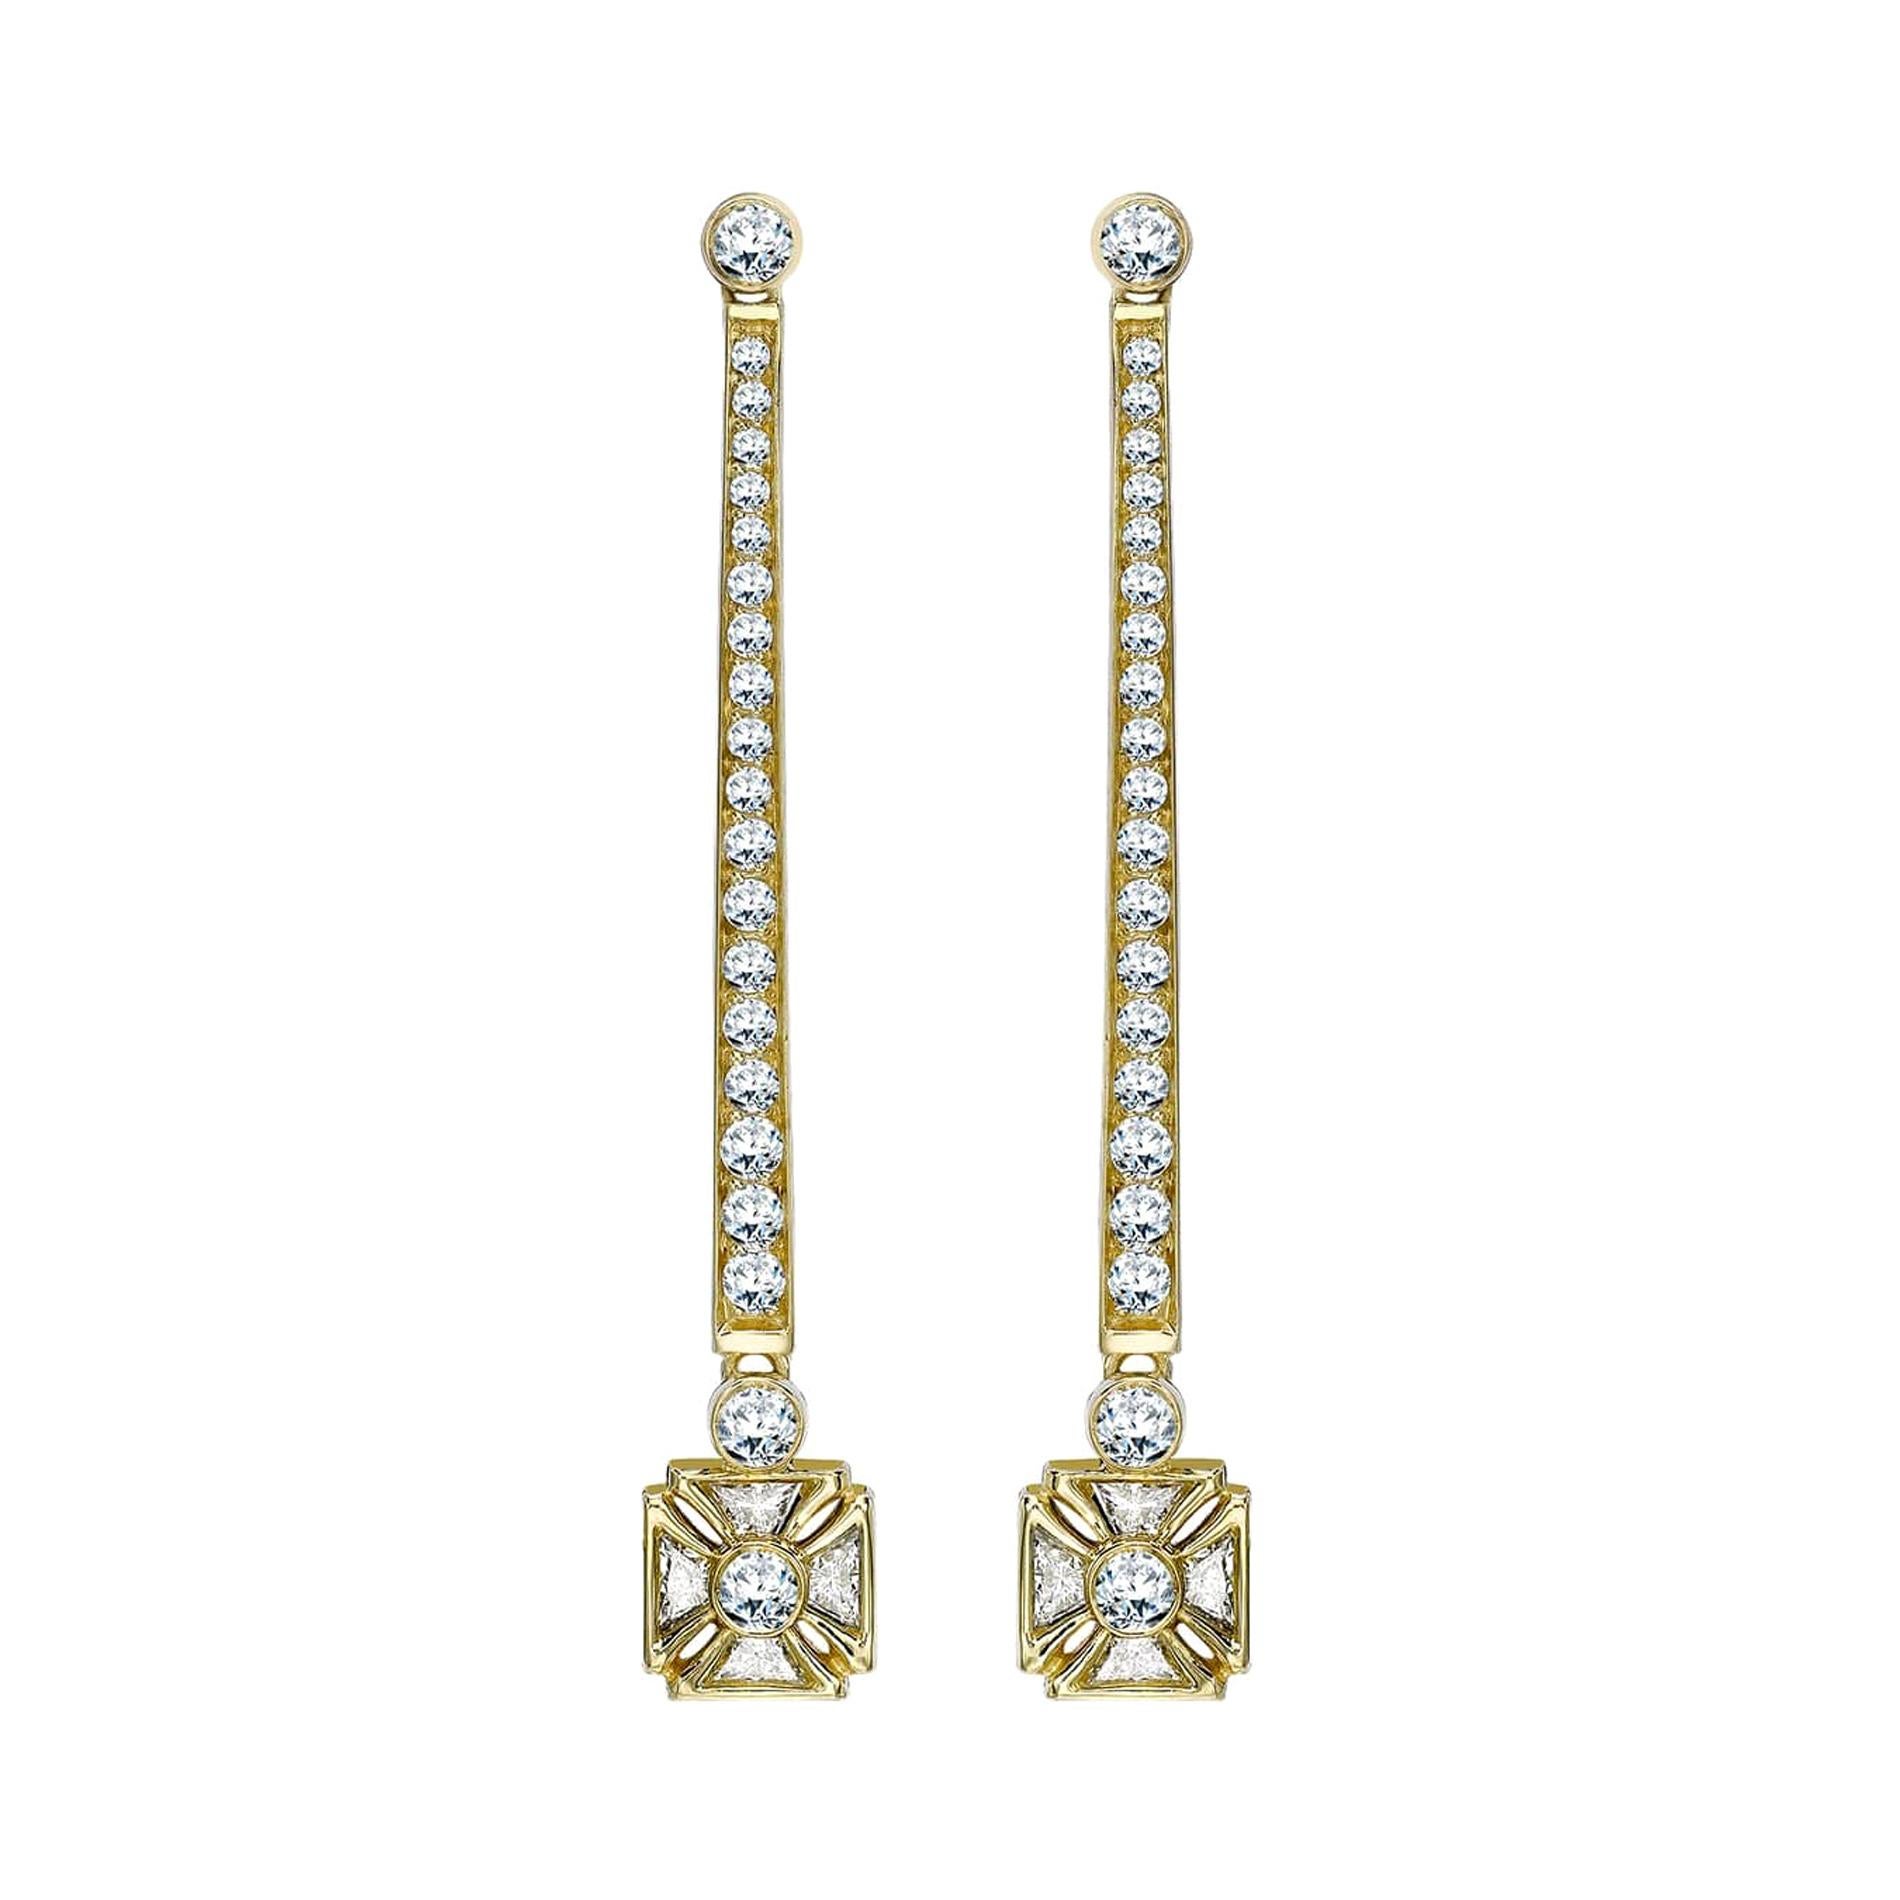 Sybarite Royal Jubilee Earrings in Yellow Gold with White Diamonds